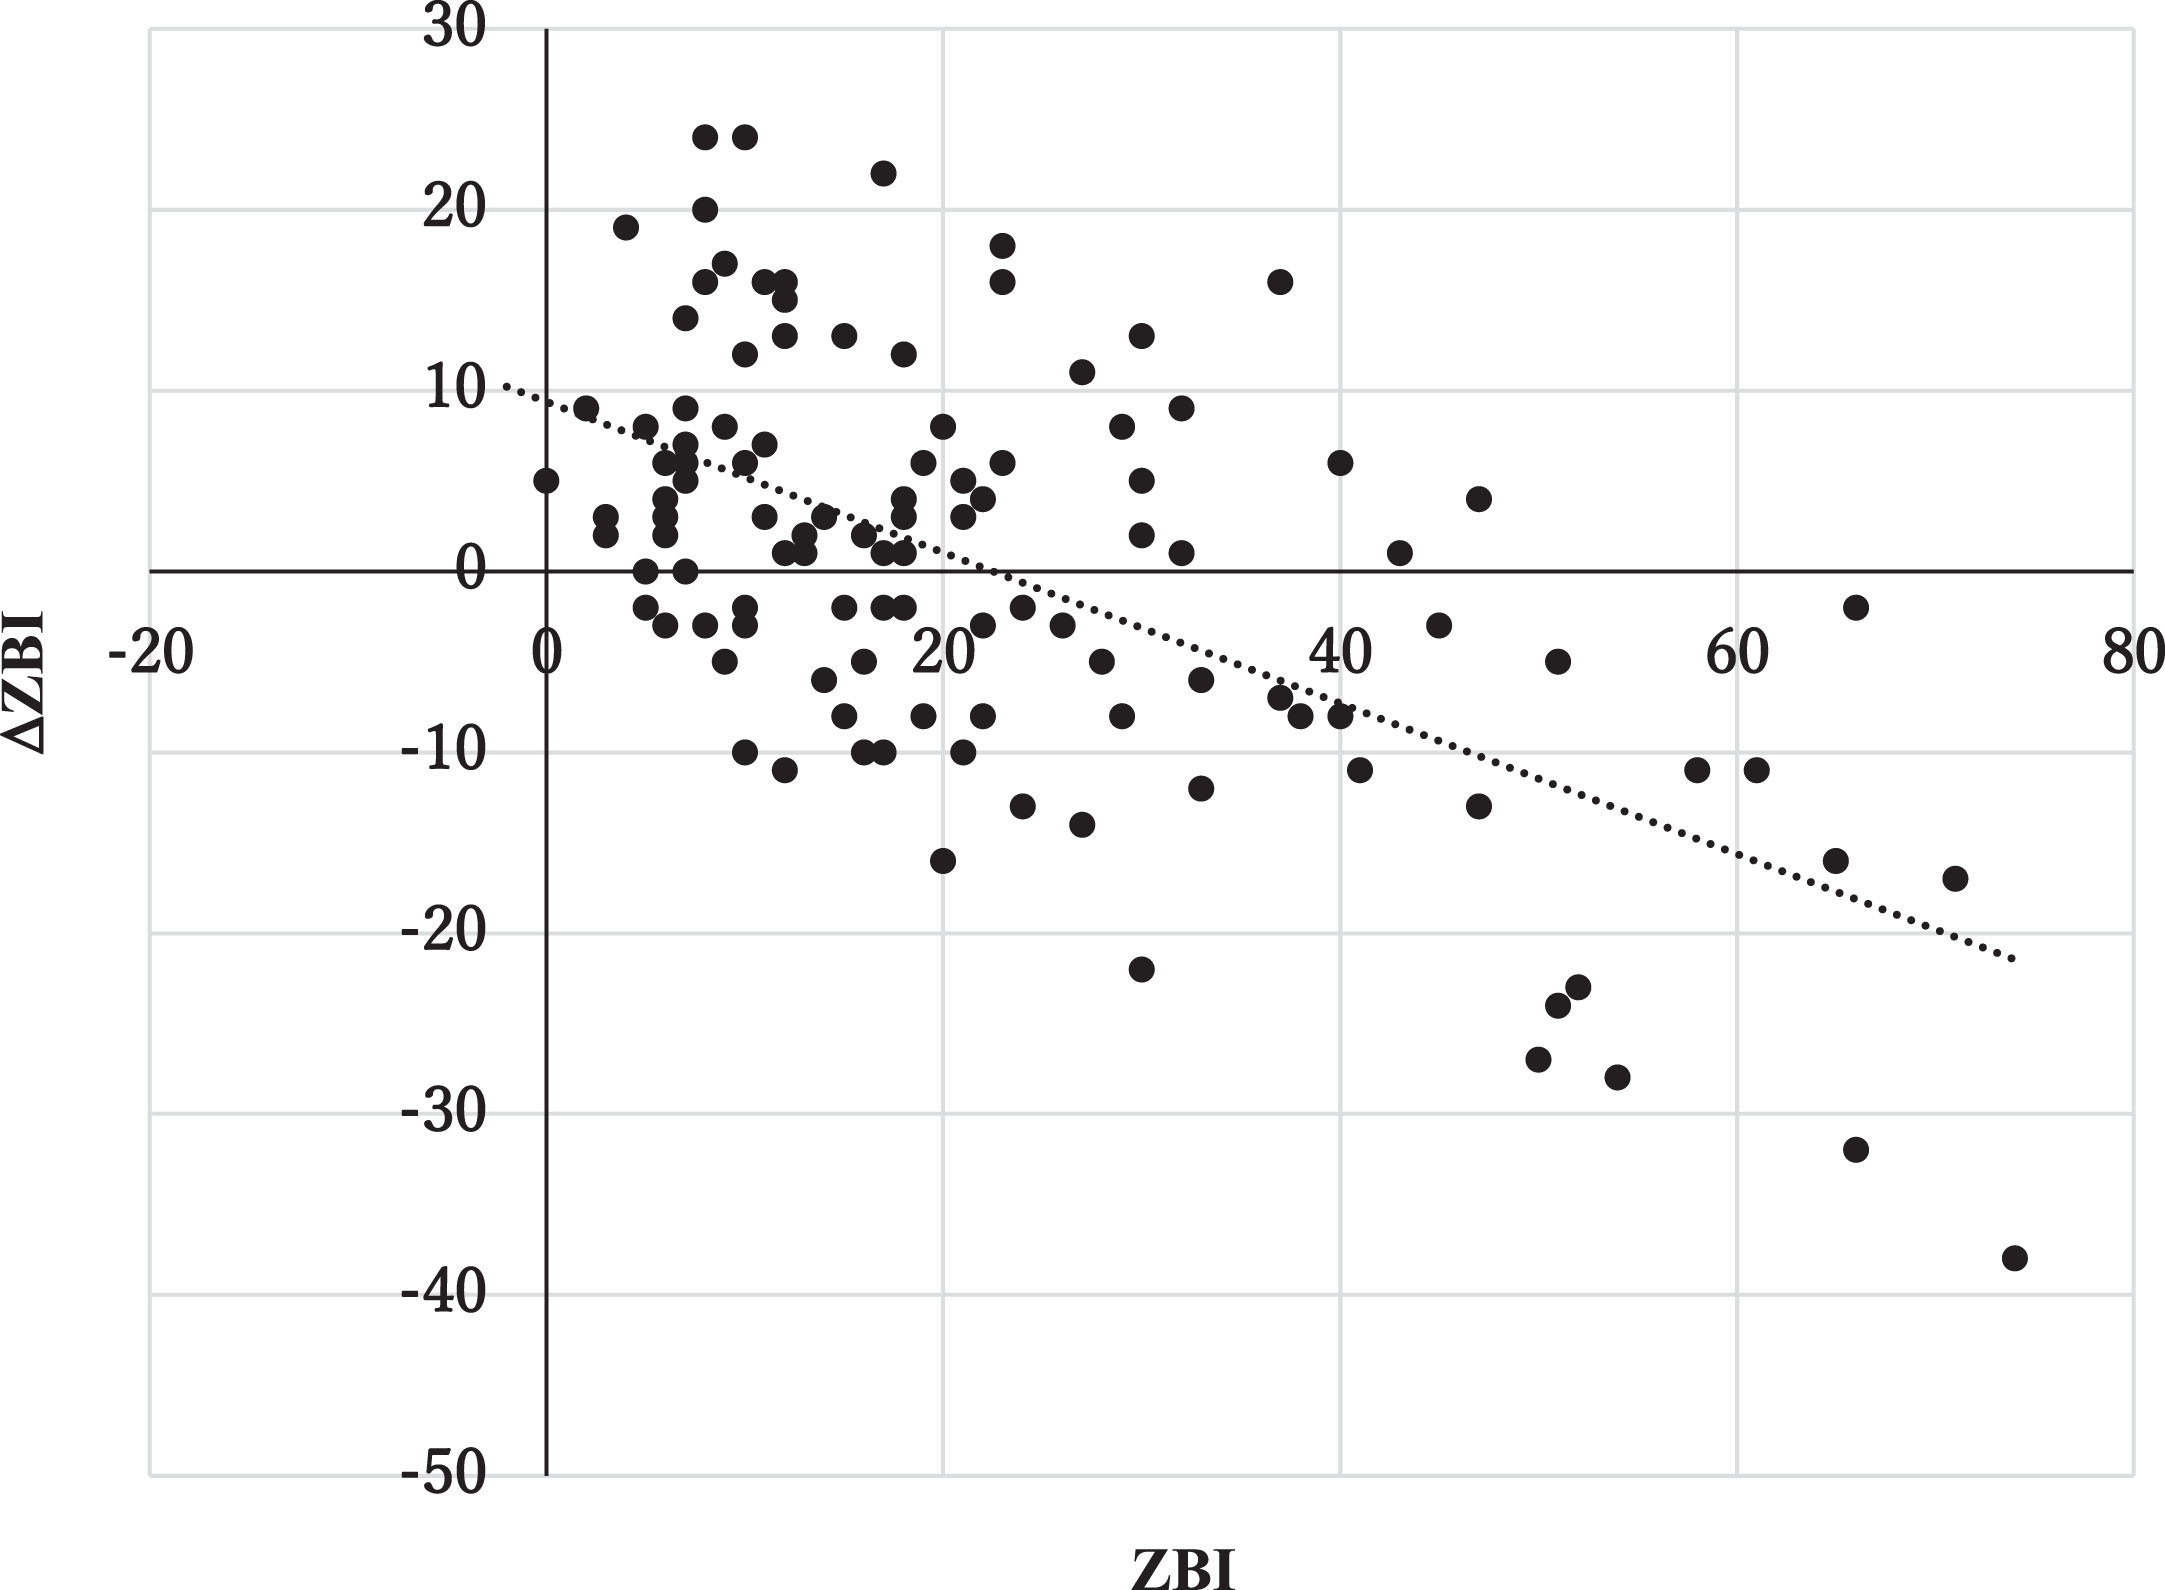 Relationship between Zarit Burden Interview (ZBI) scores at initial visit and ΔZBI. The horizontal and vertical axes show ZBI scores at initial visit and ΔZBI (the difference in ZBI scores between initial visit and follow-up evaluation), respectively.